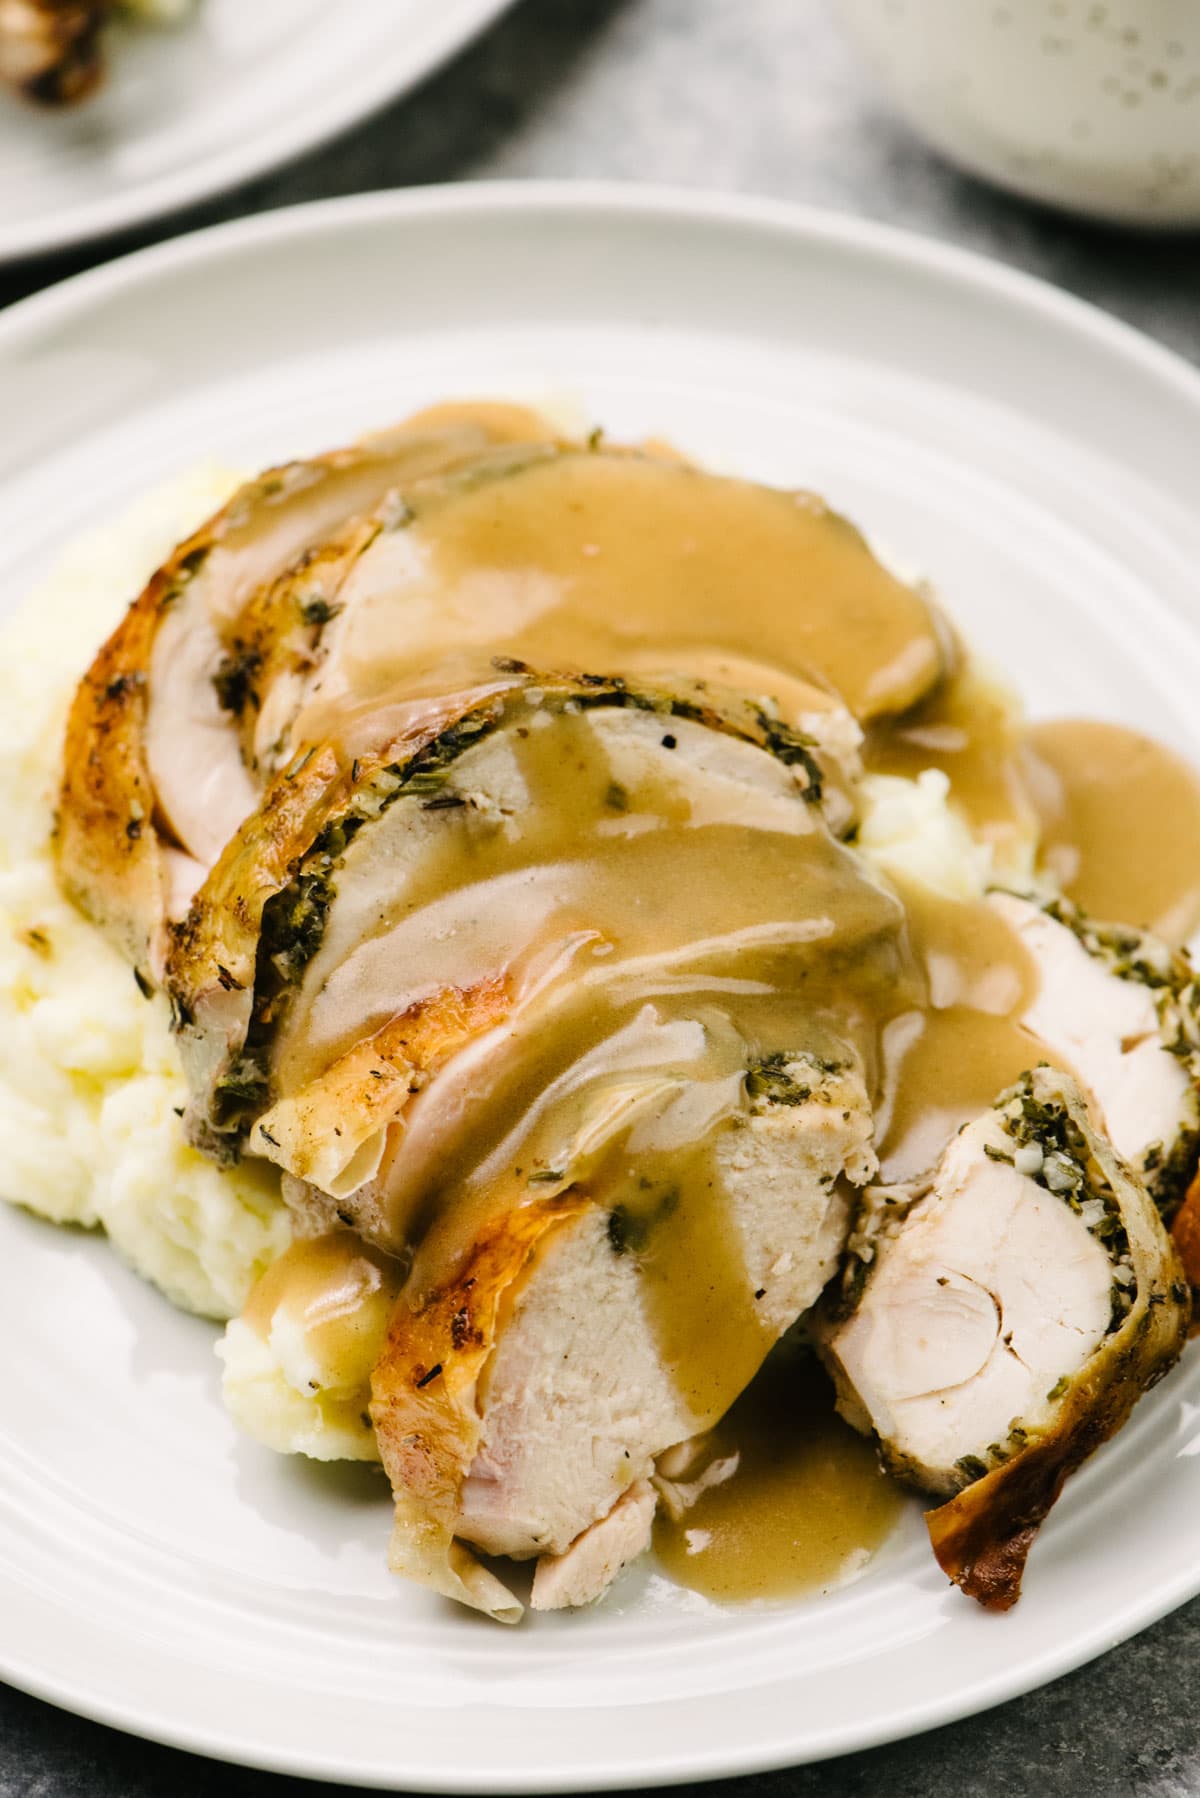 Side view, herb roasted chicken breast pieces over mashed potatoes, smothered with gravy, on a white plate.